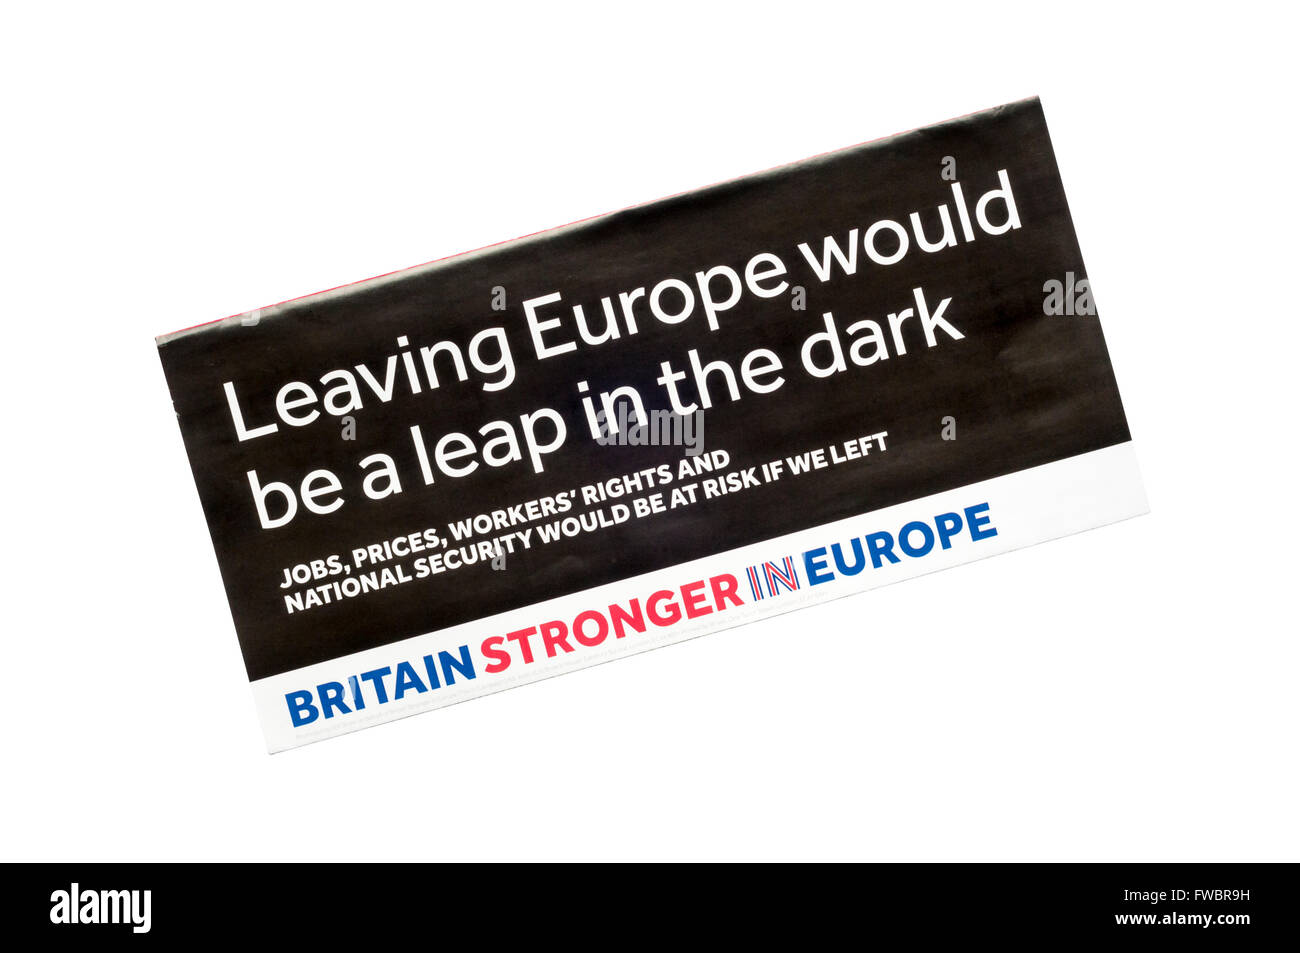 A leaflet produced by Britain Stronger in Europe, campaigning for the UK to stay in the EU. Stock Photo